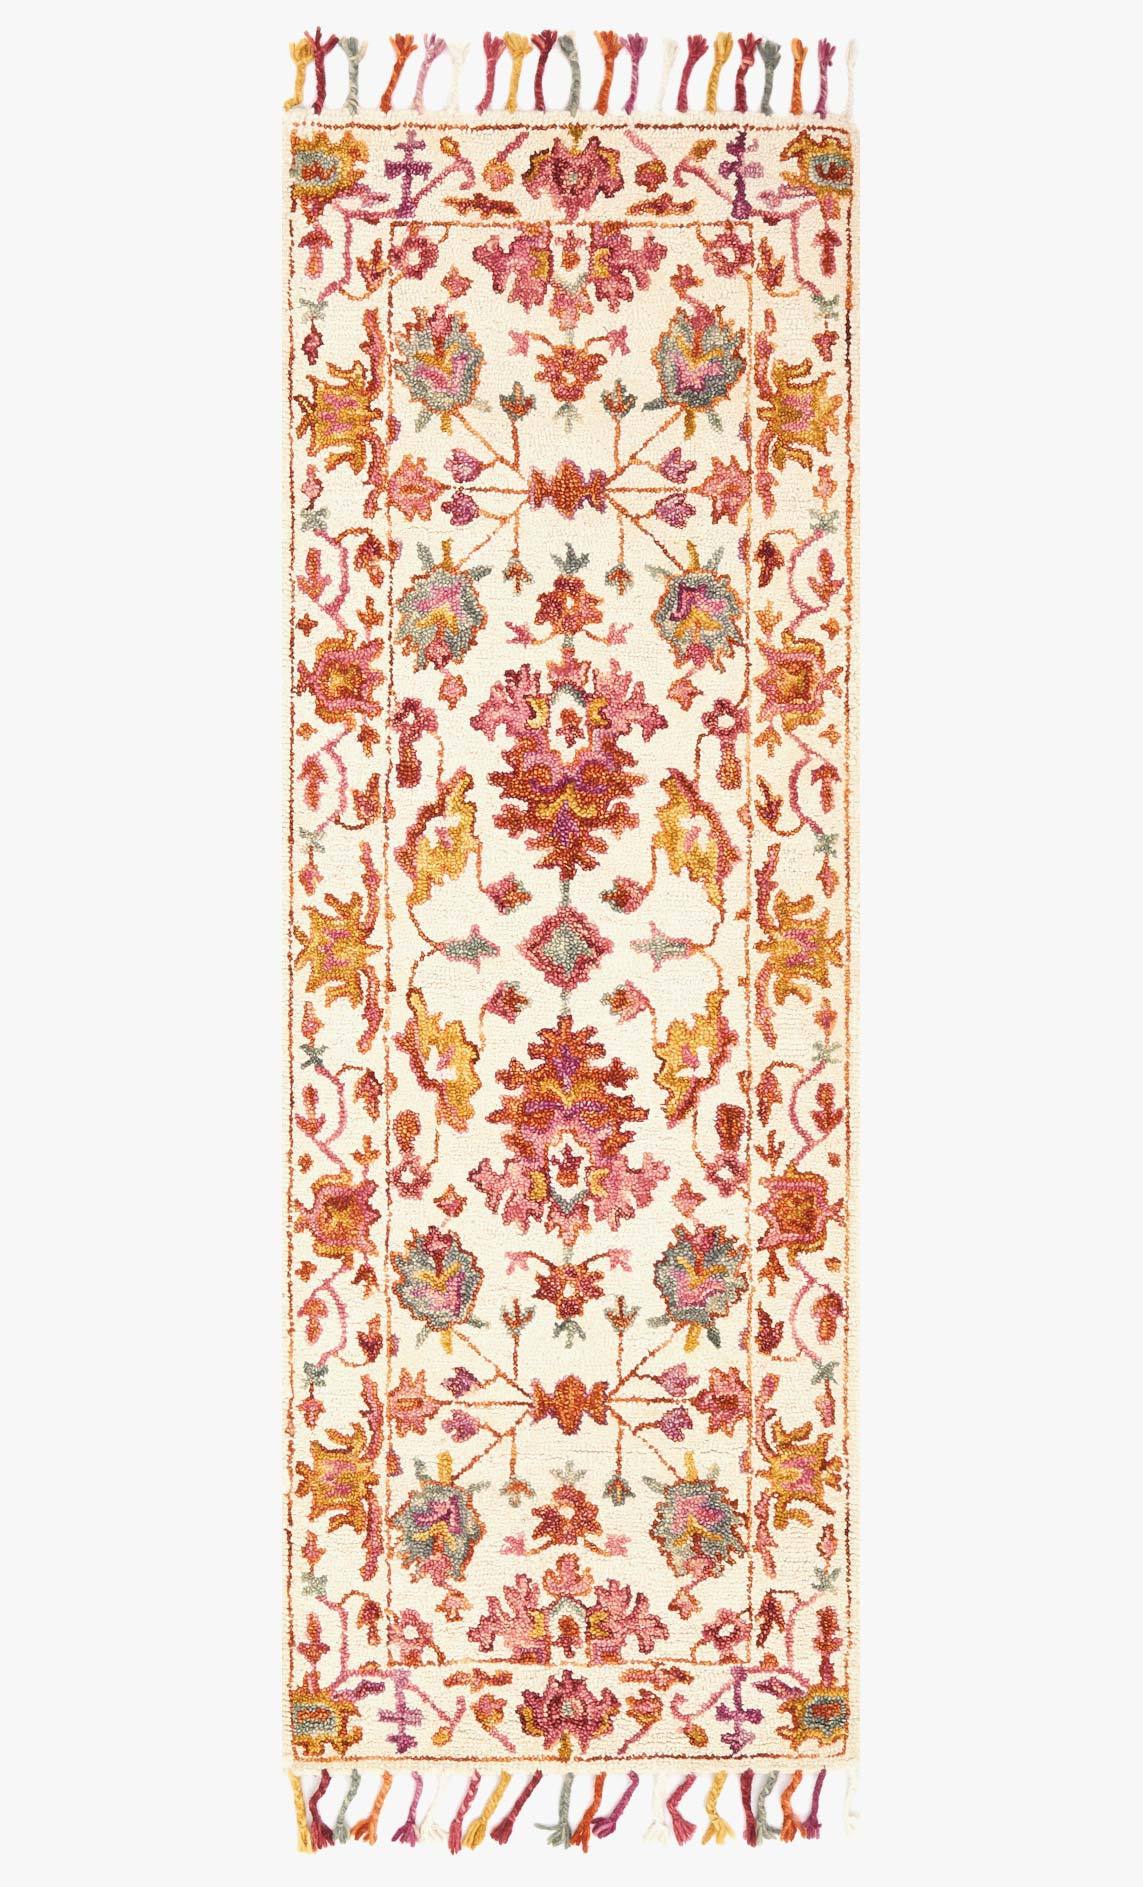 ZR-601: Wool rug - hand knotted